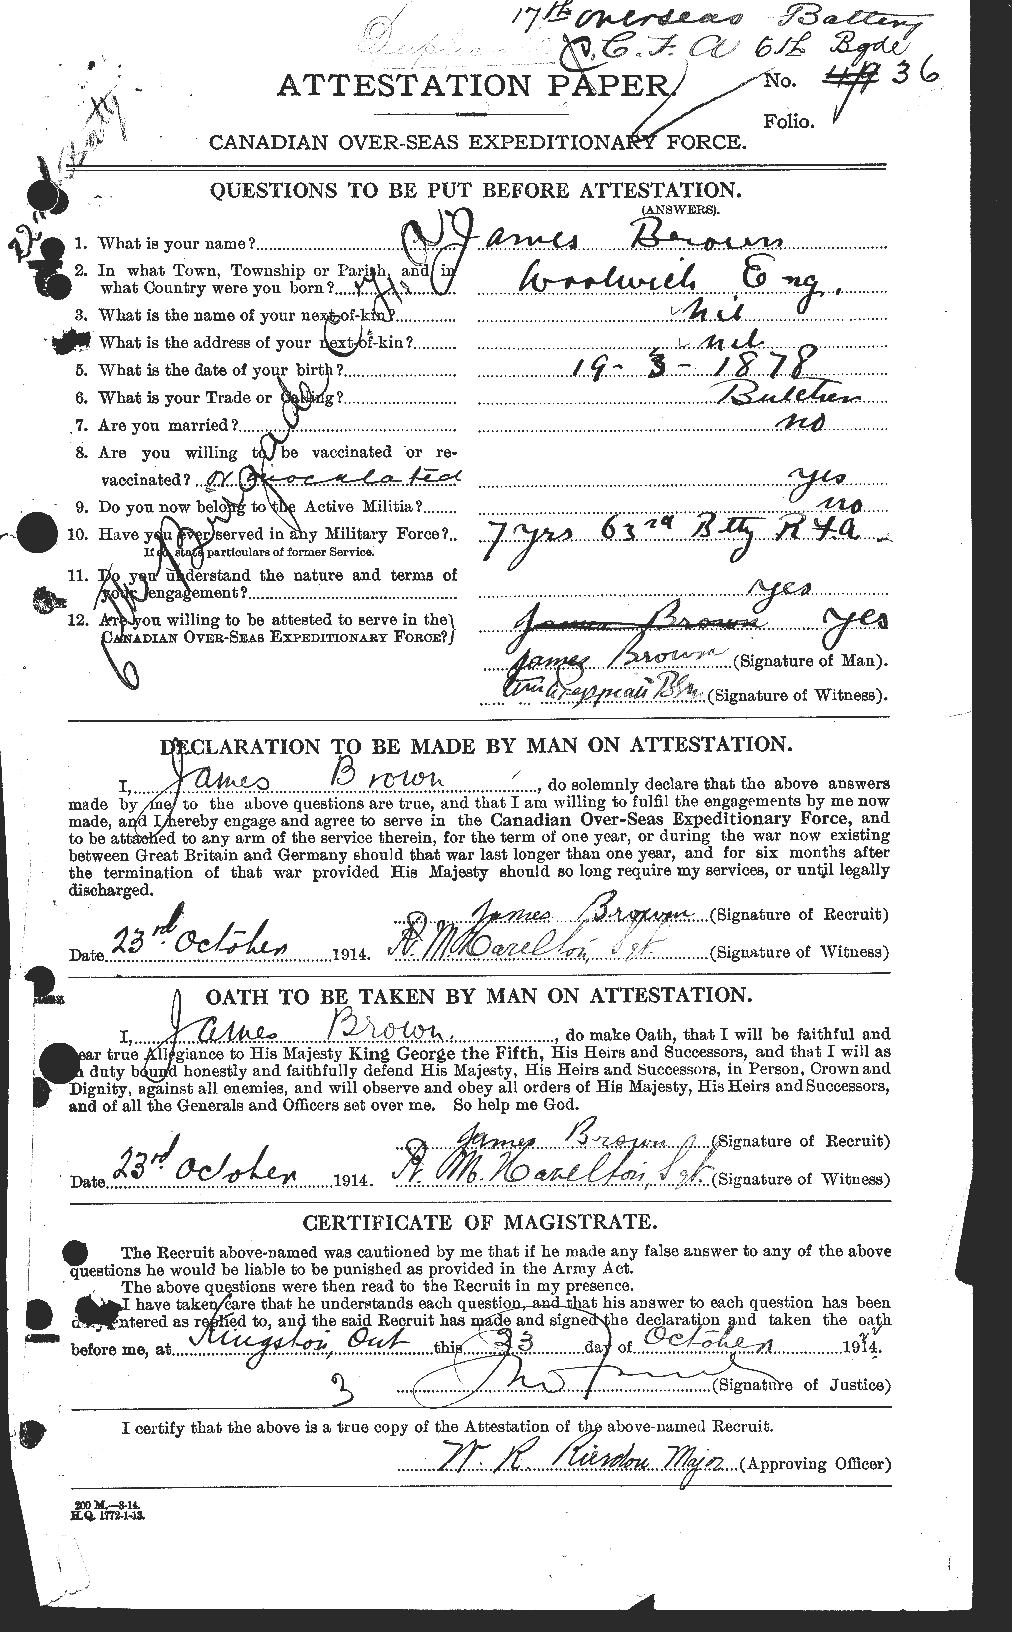 Personnel Records of the First World War - CEF 269815a